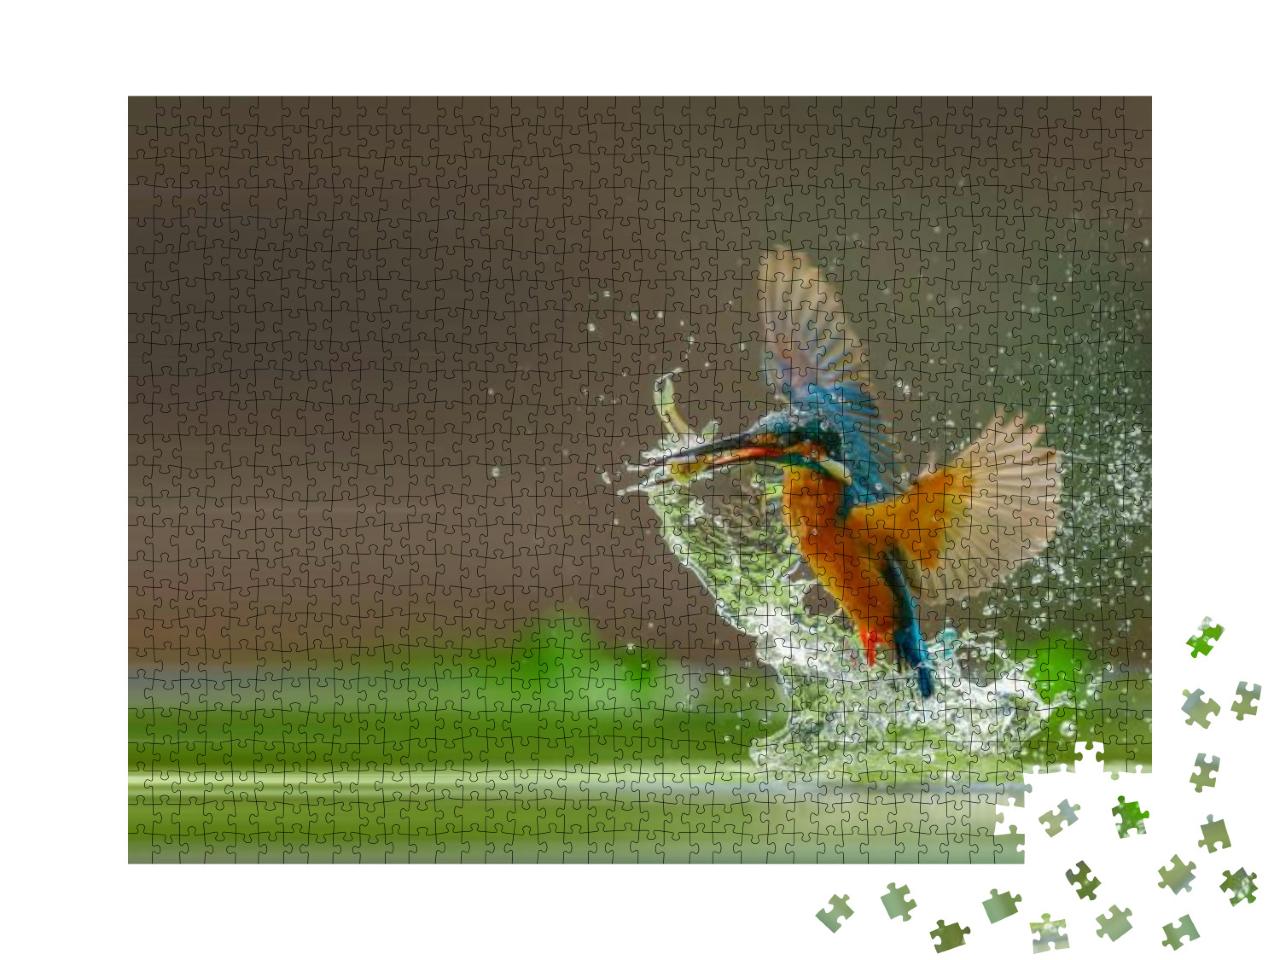 Common Kingfisher Catches Fish Out of Water... Jigsaw Puzzle with 1000 pieces